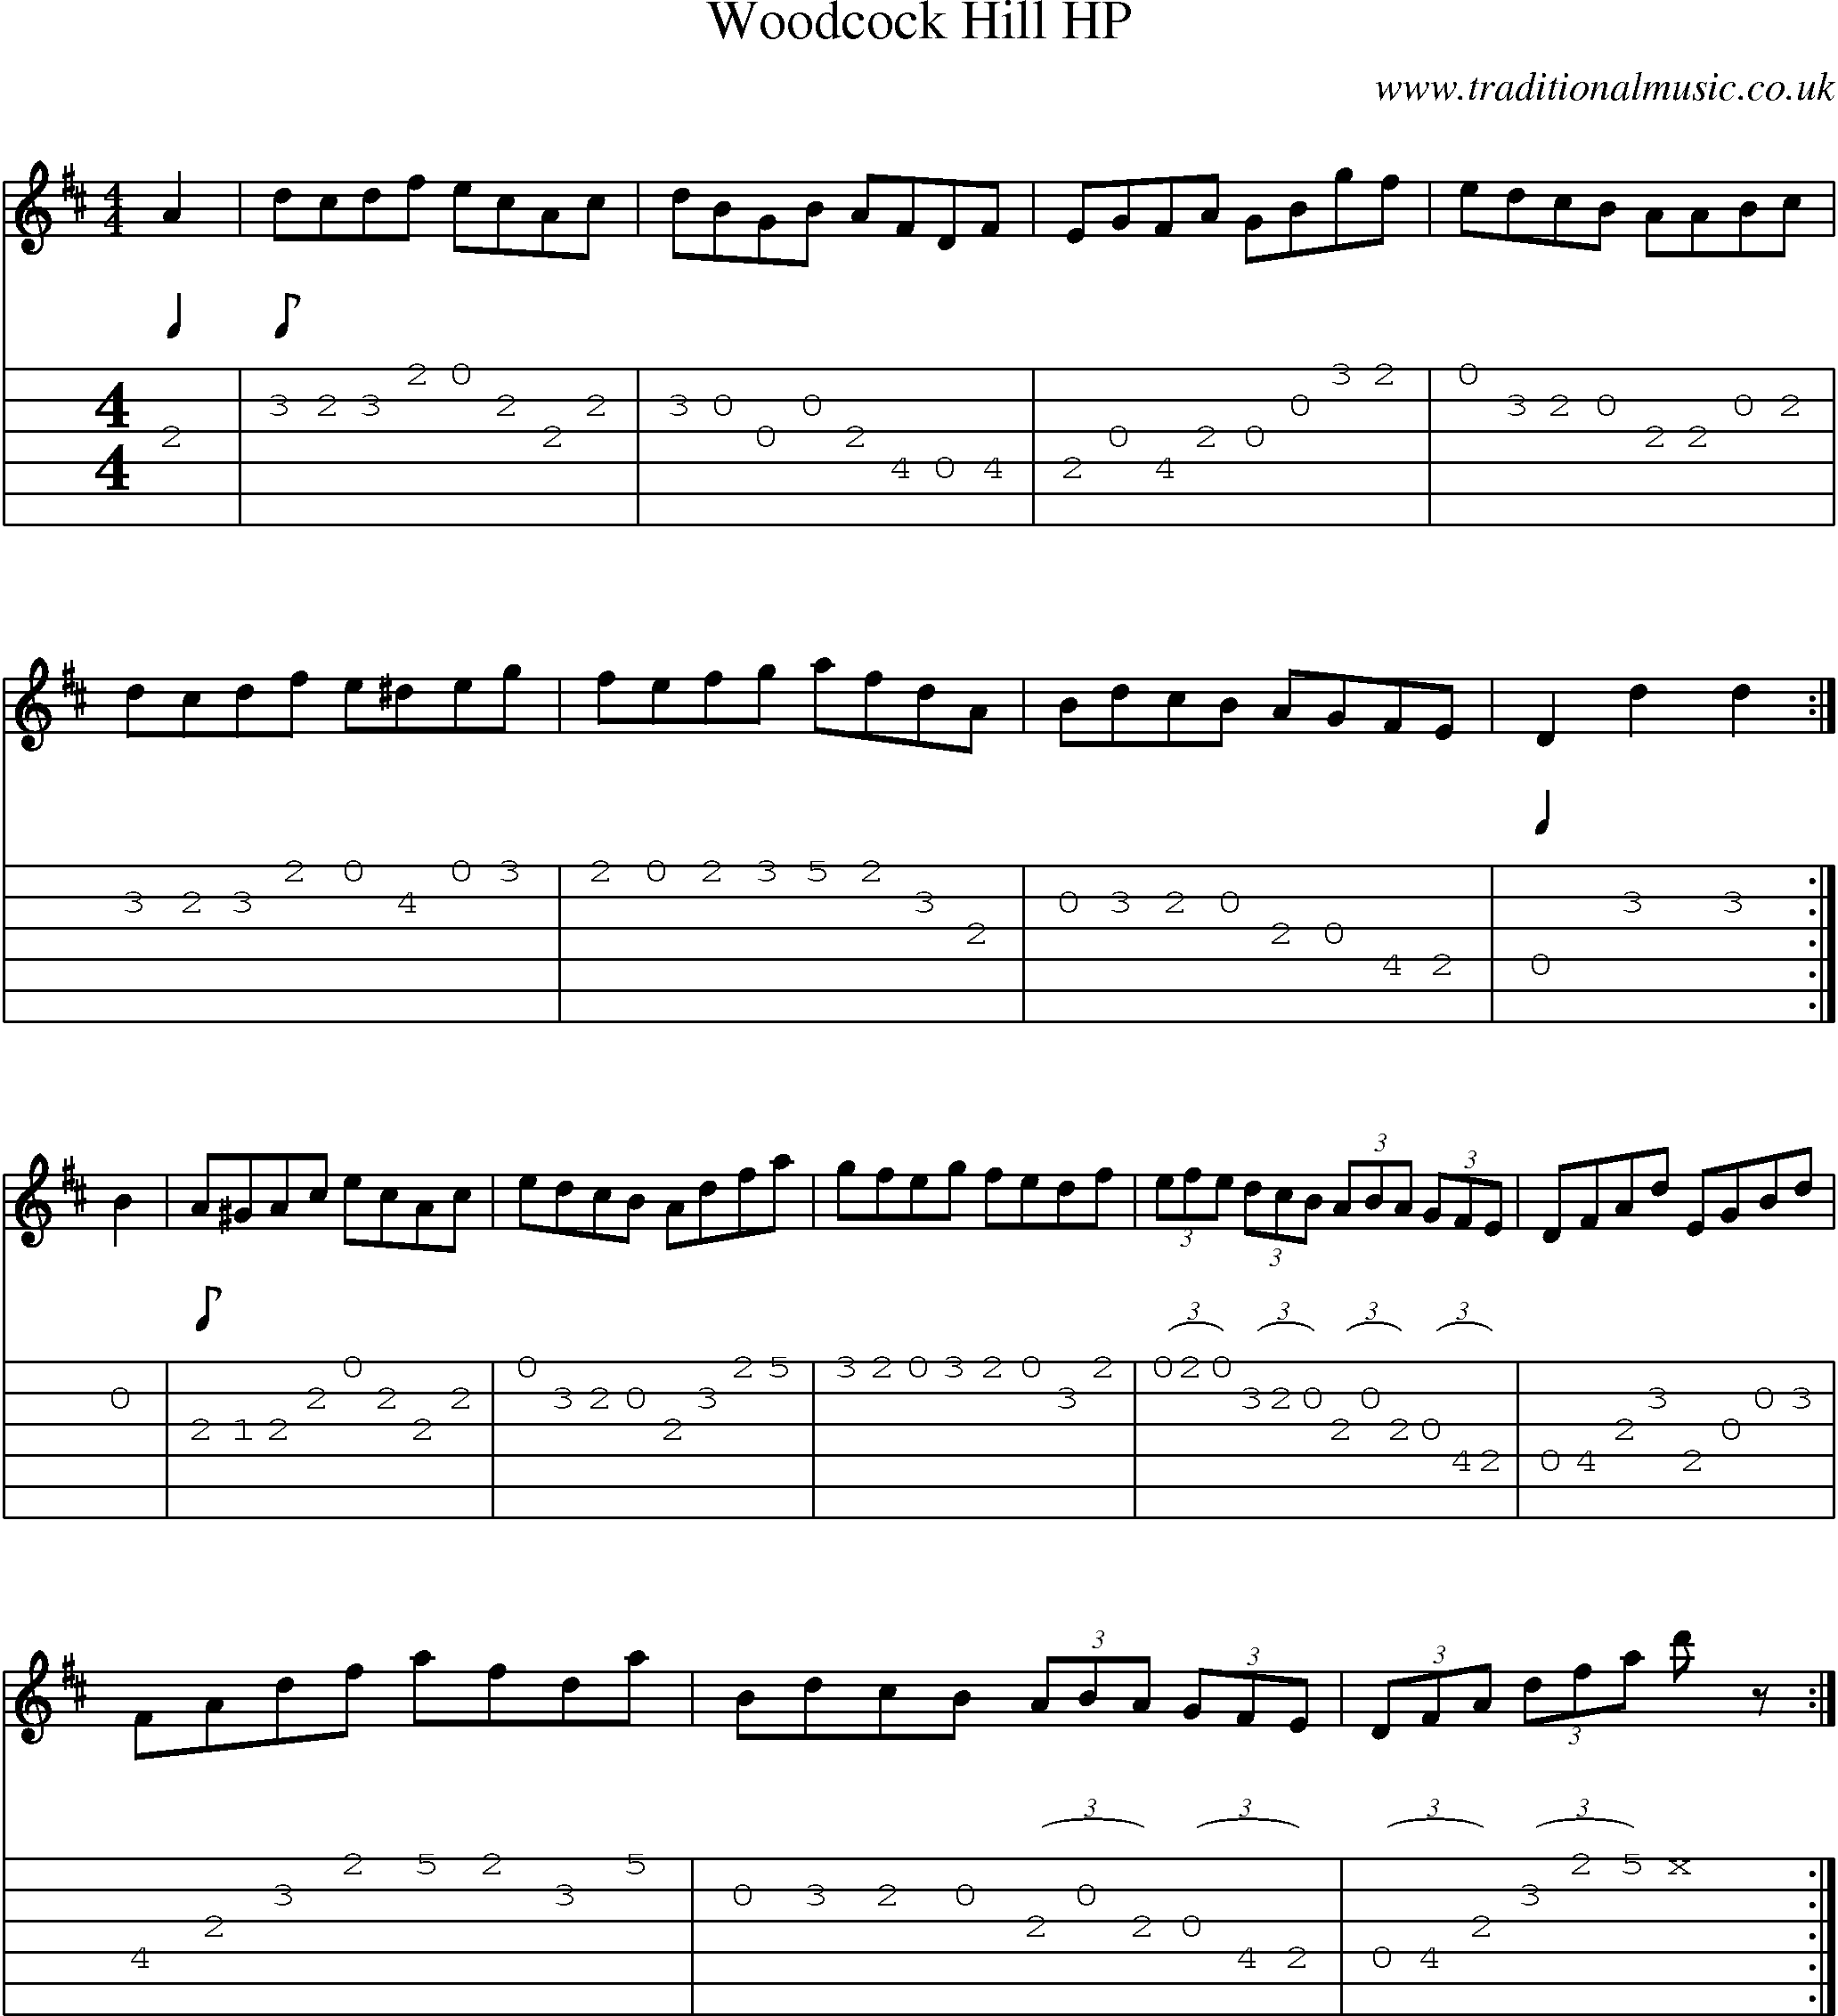 Music Score and Guitar Tabs for Woodcock Hill